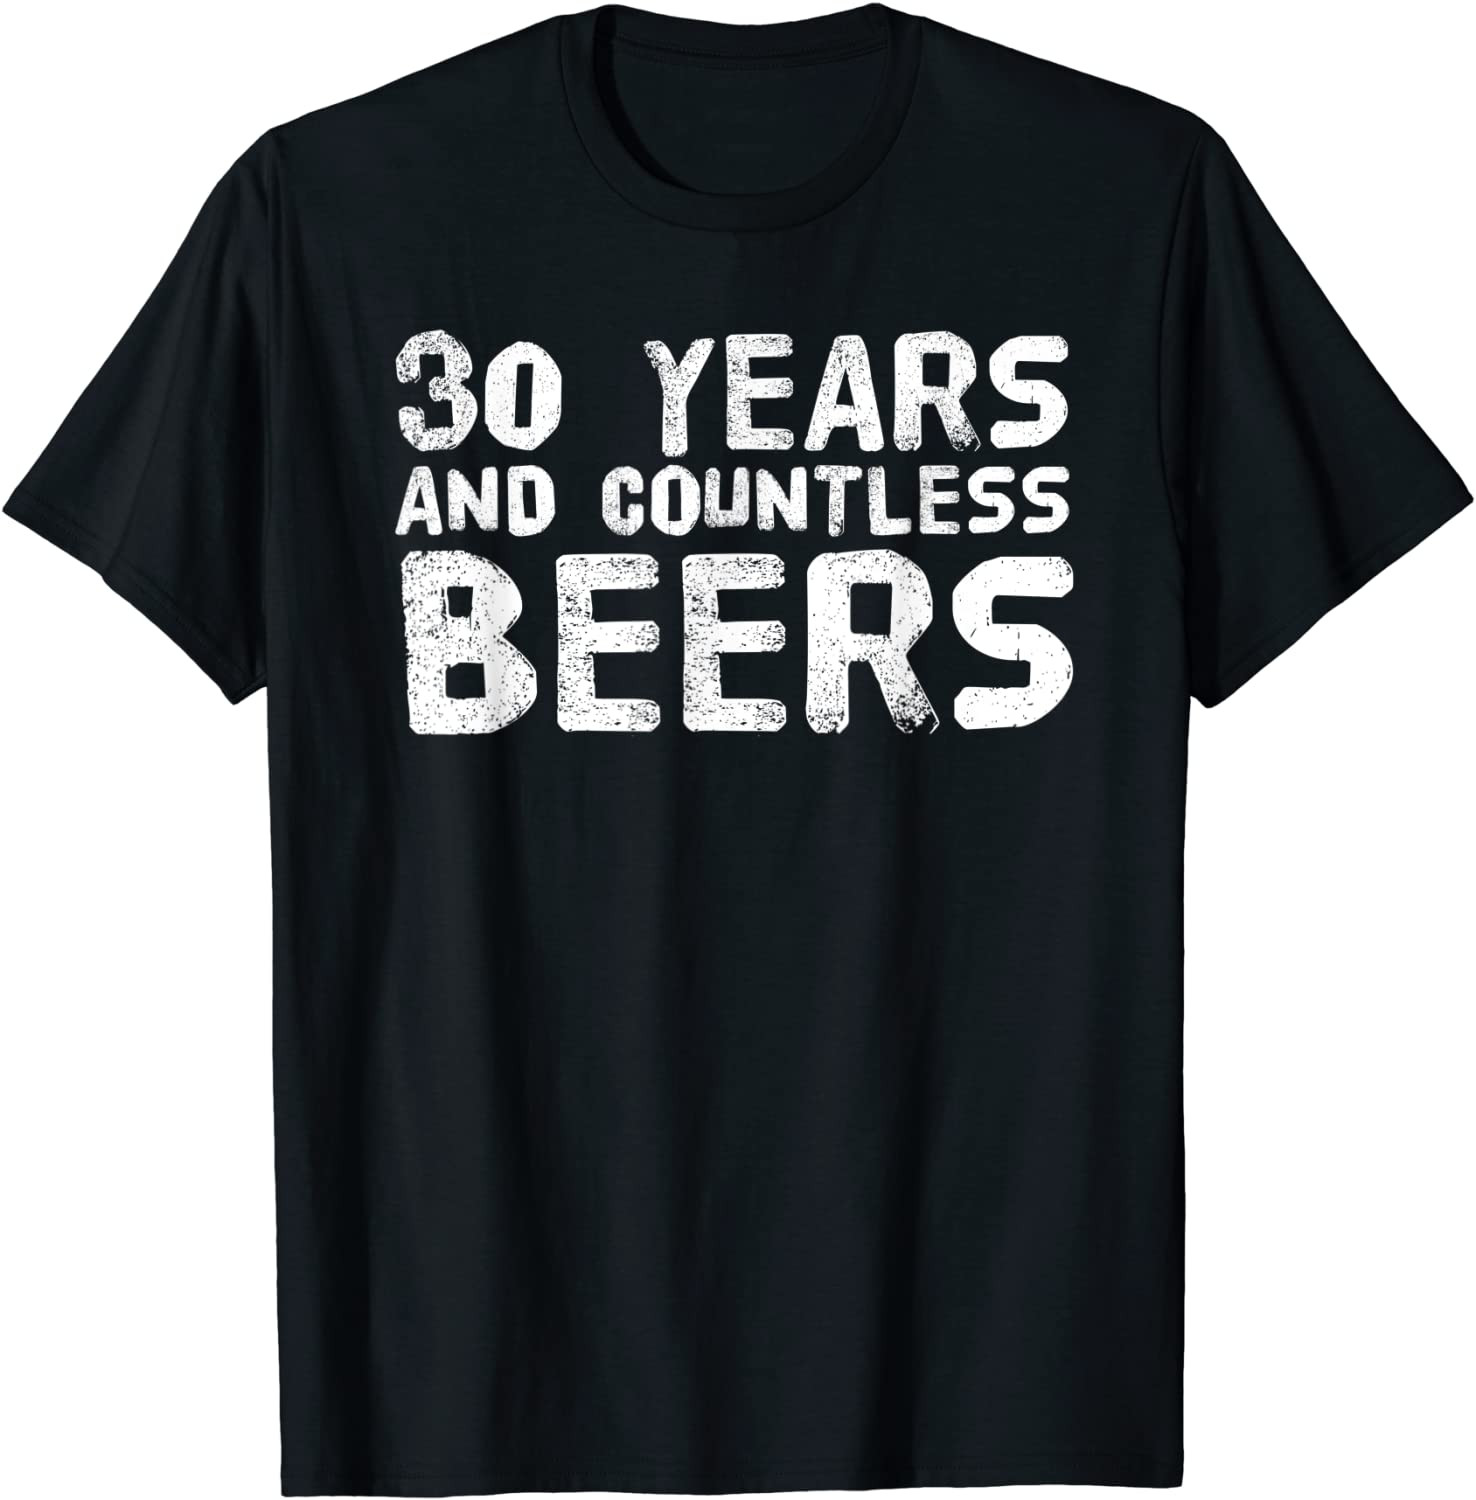 30 YEARS AND COUNTLESS BEERS T-Shirt